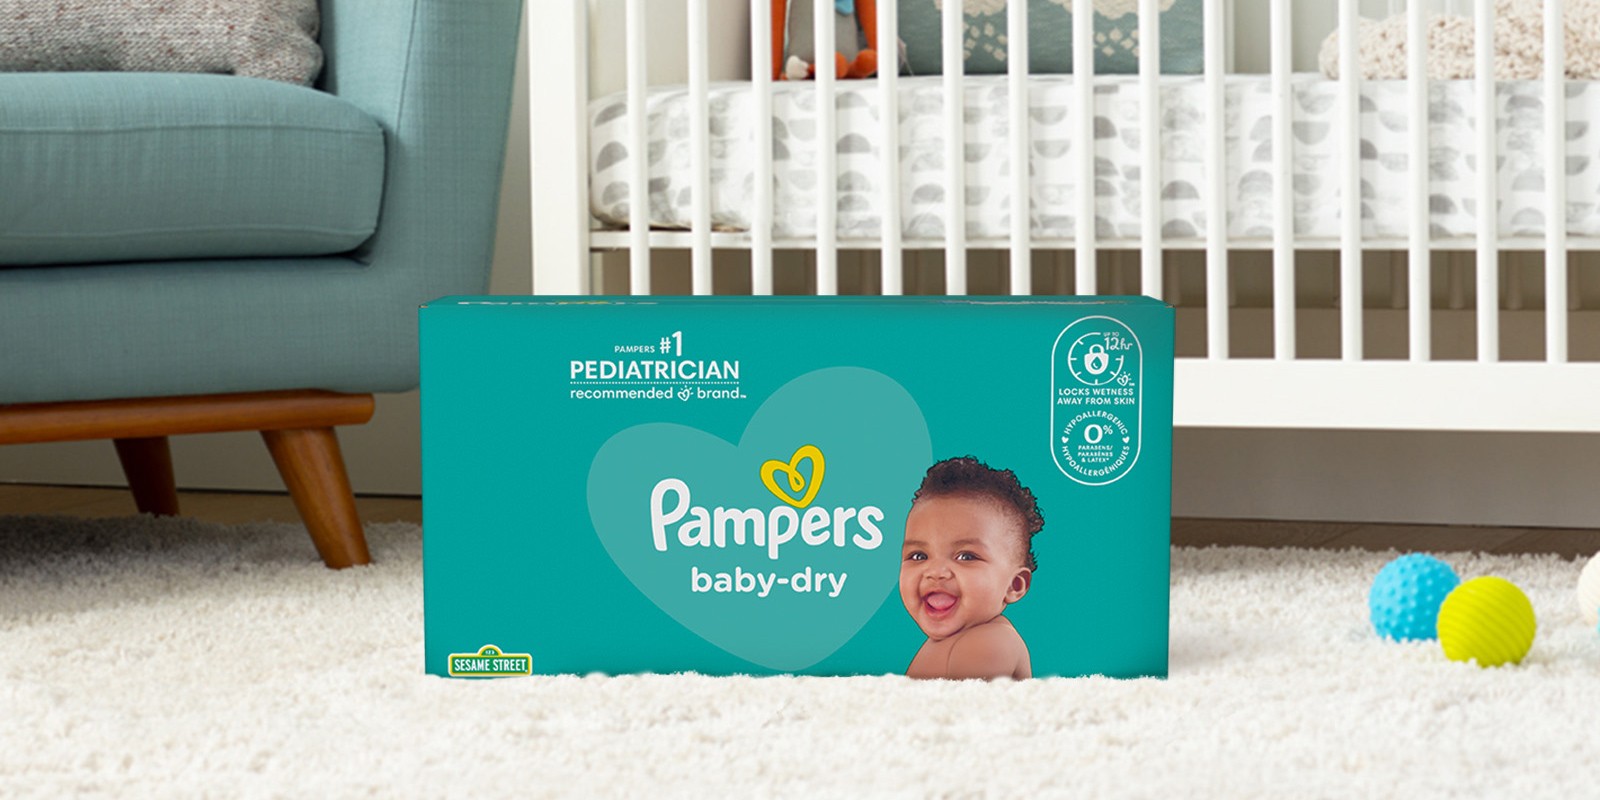 SWOT Analysis of Pampers - Topbanner Babydry